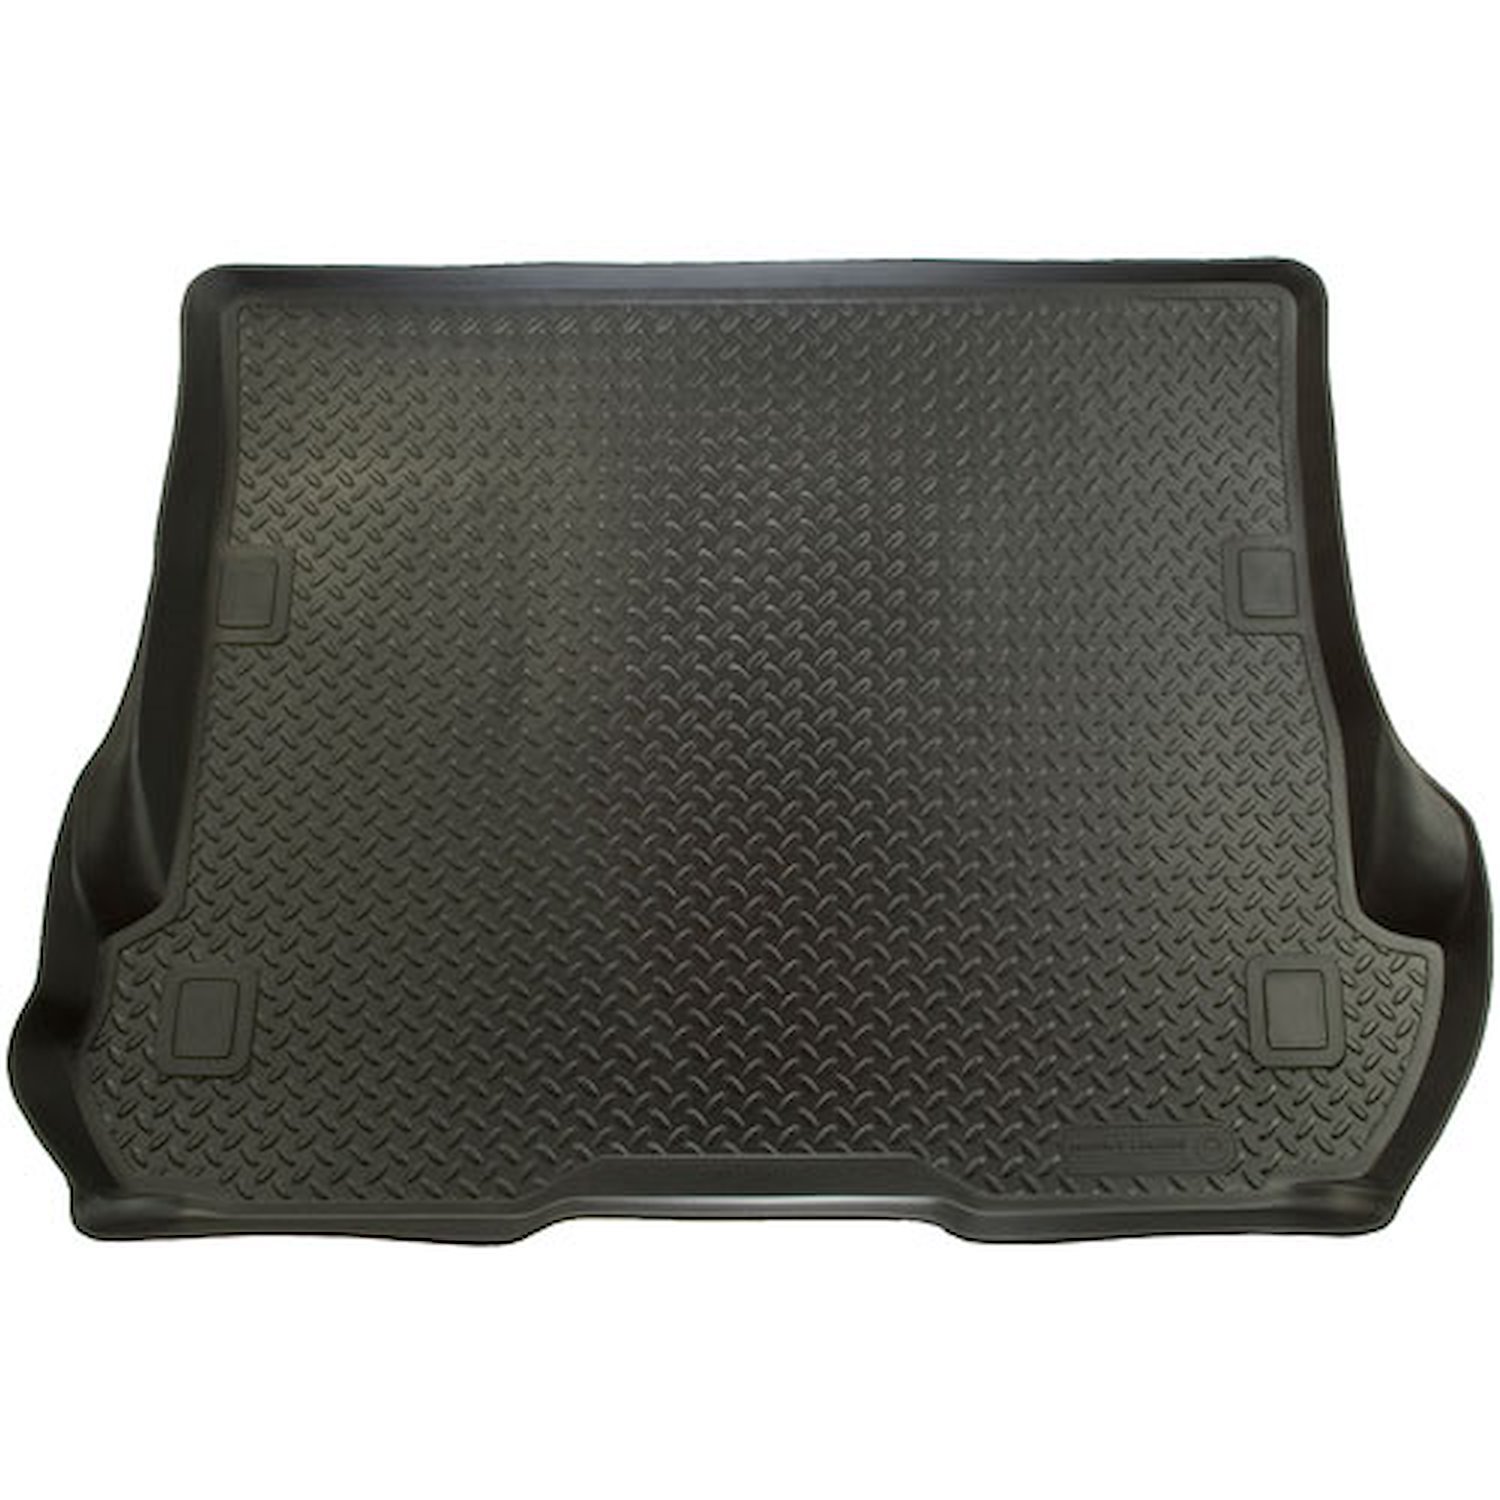 Classic Style Cargo Area Liner 2008-2013 for Nissan Rogue